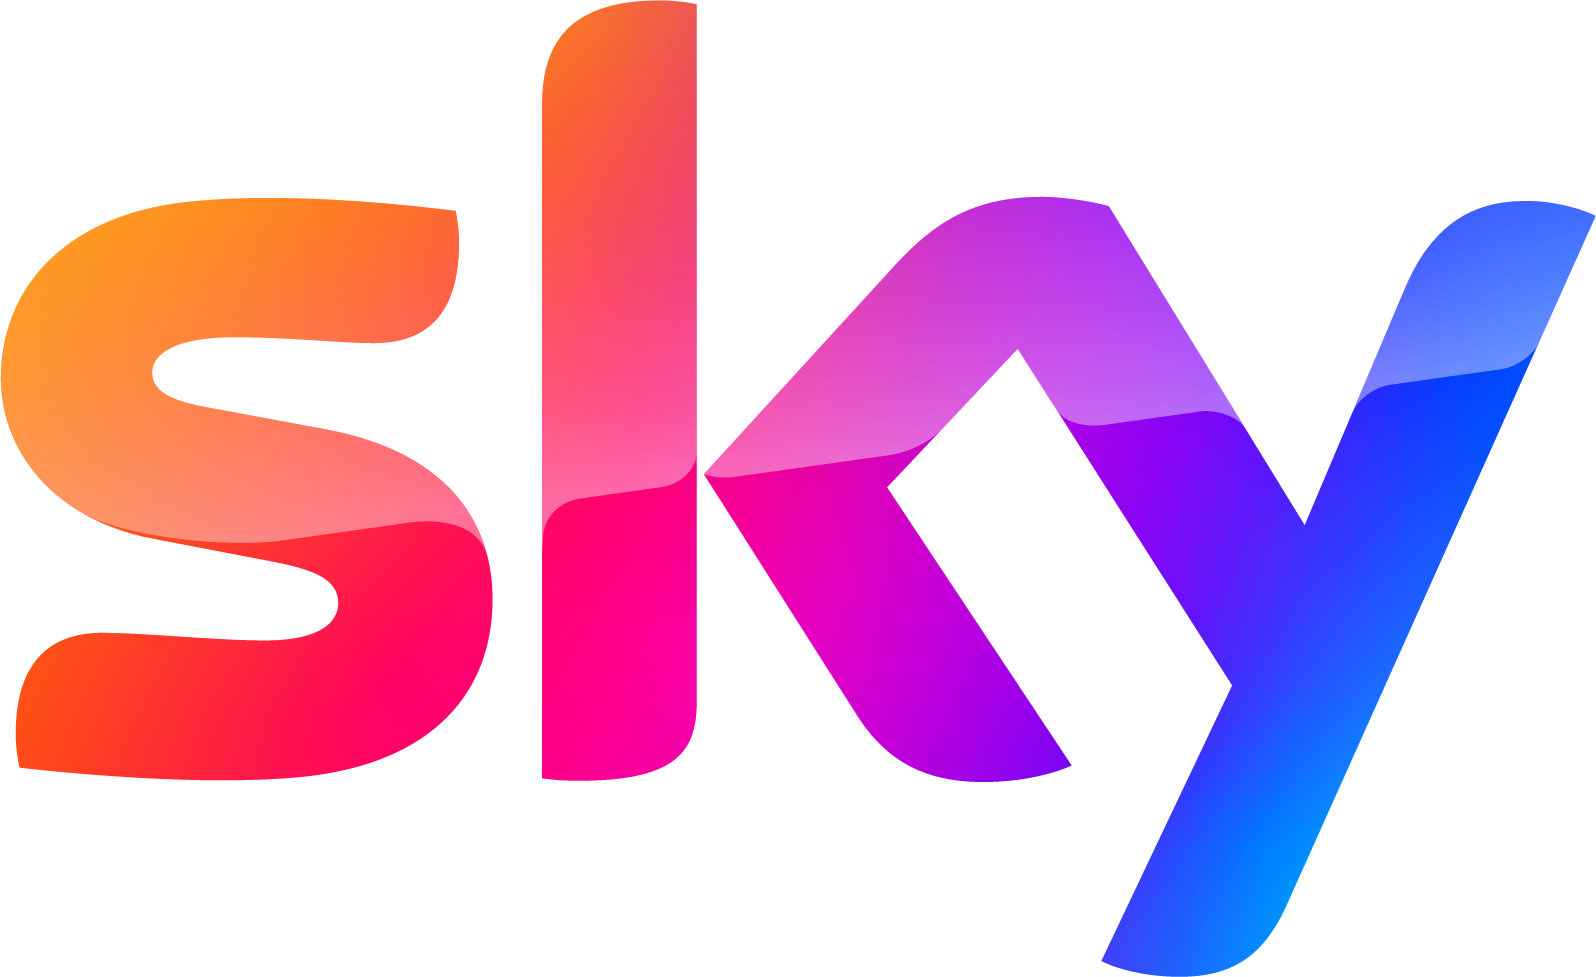 Black Friday deals: Sky launches early sale on Sky Glass, broadband and mobile